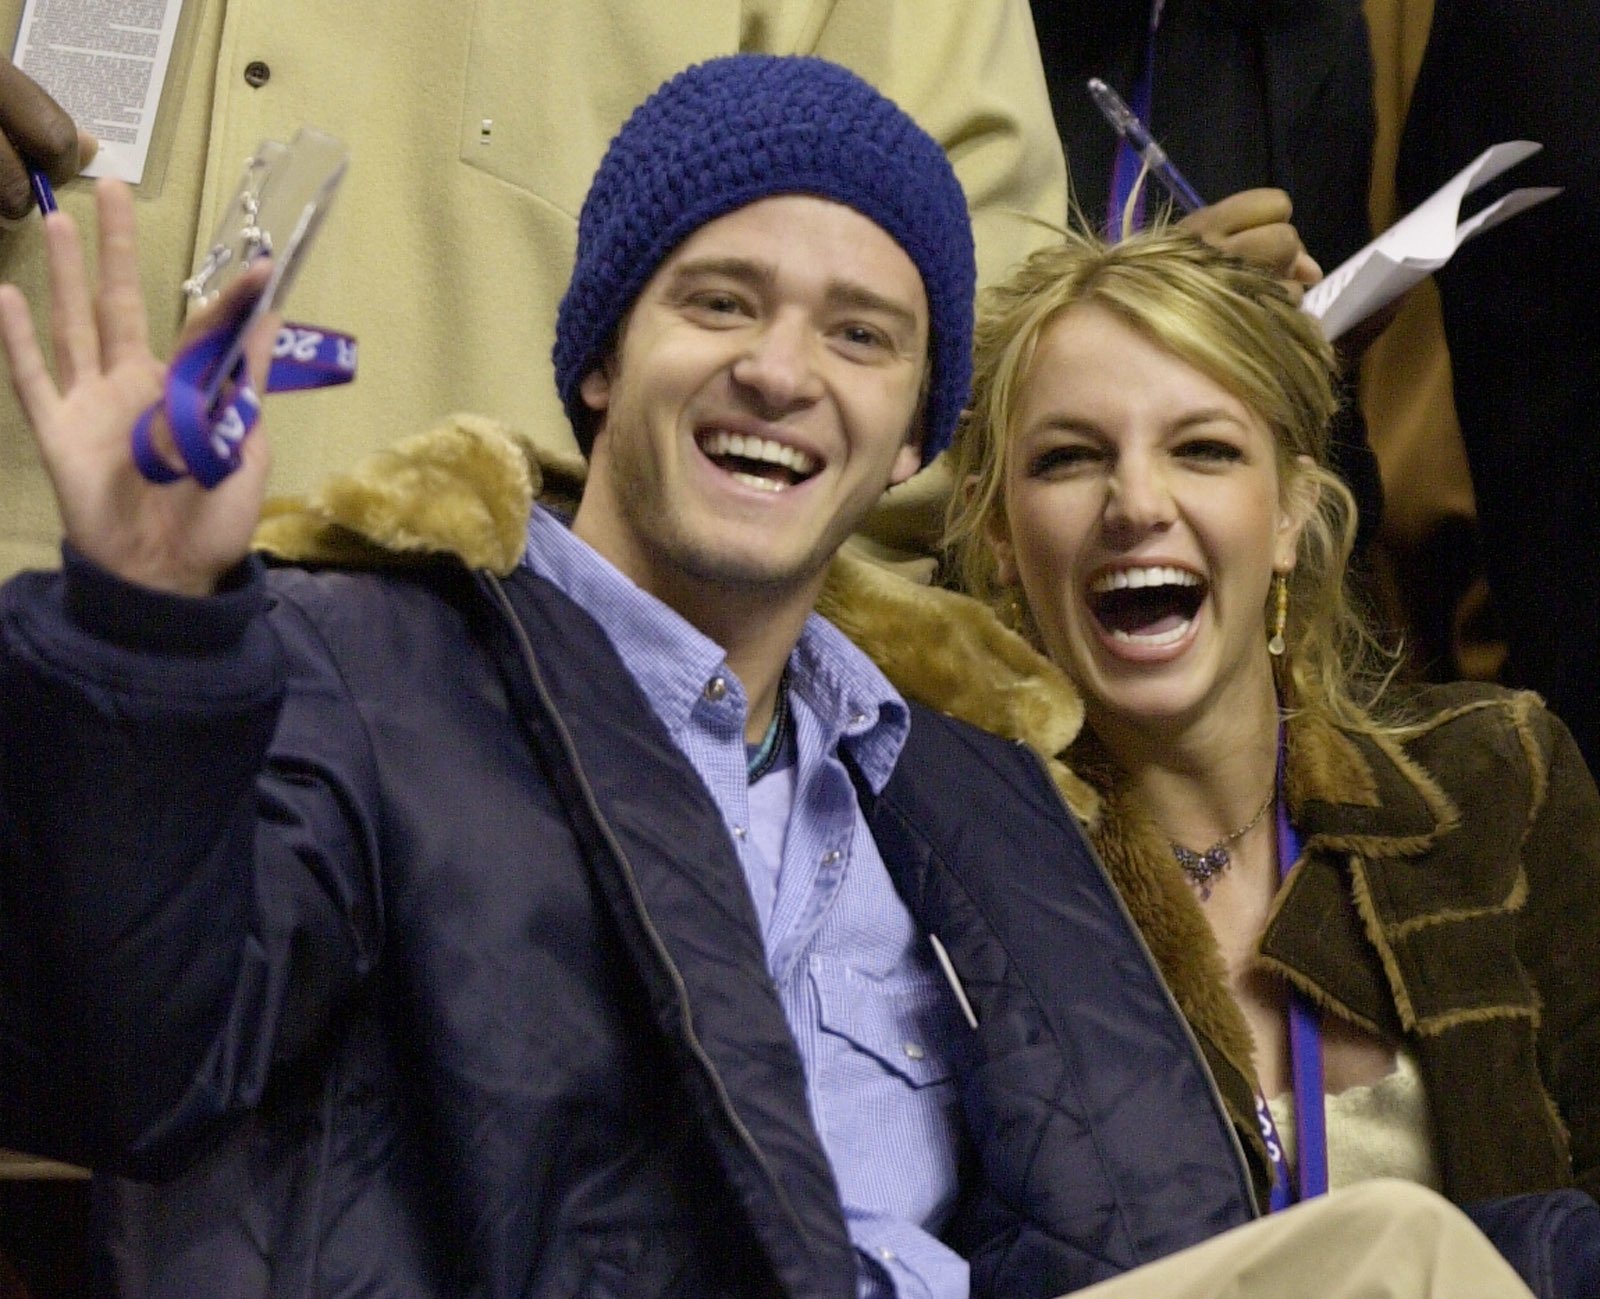 In this file photo, Justin Timberlake and Britney Spears wave to the crowd prior to the start of the 2002 NBA All-Star game in Philadelphia, Pennsylvania, U.S., Feb. 10, 2002. (AP Photo)